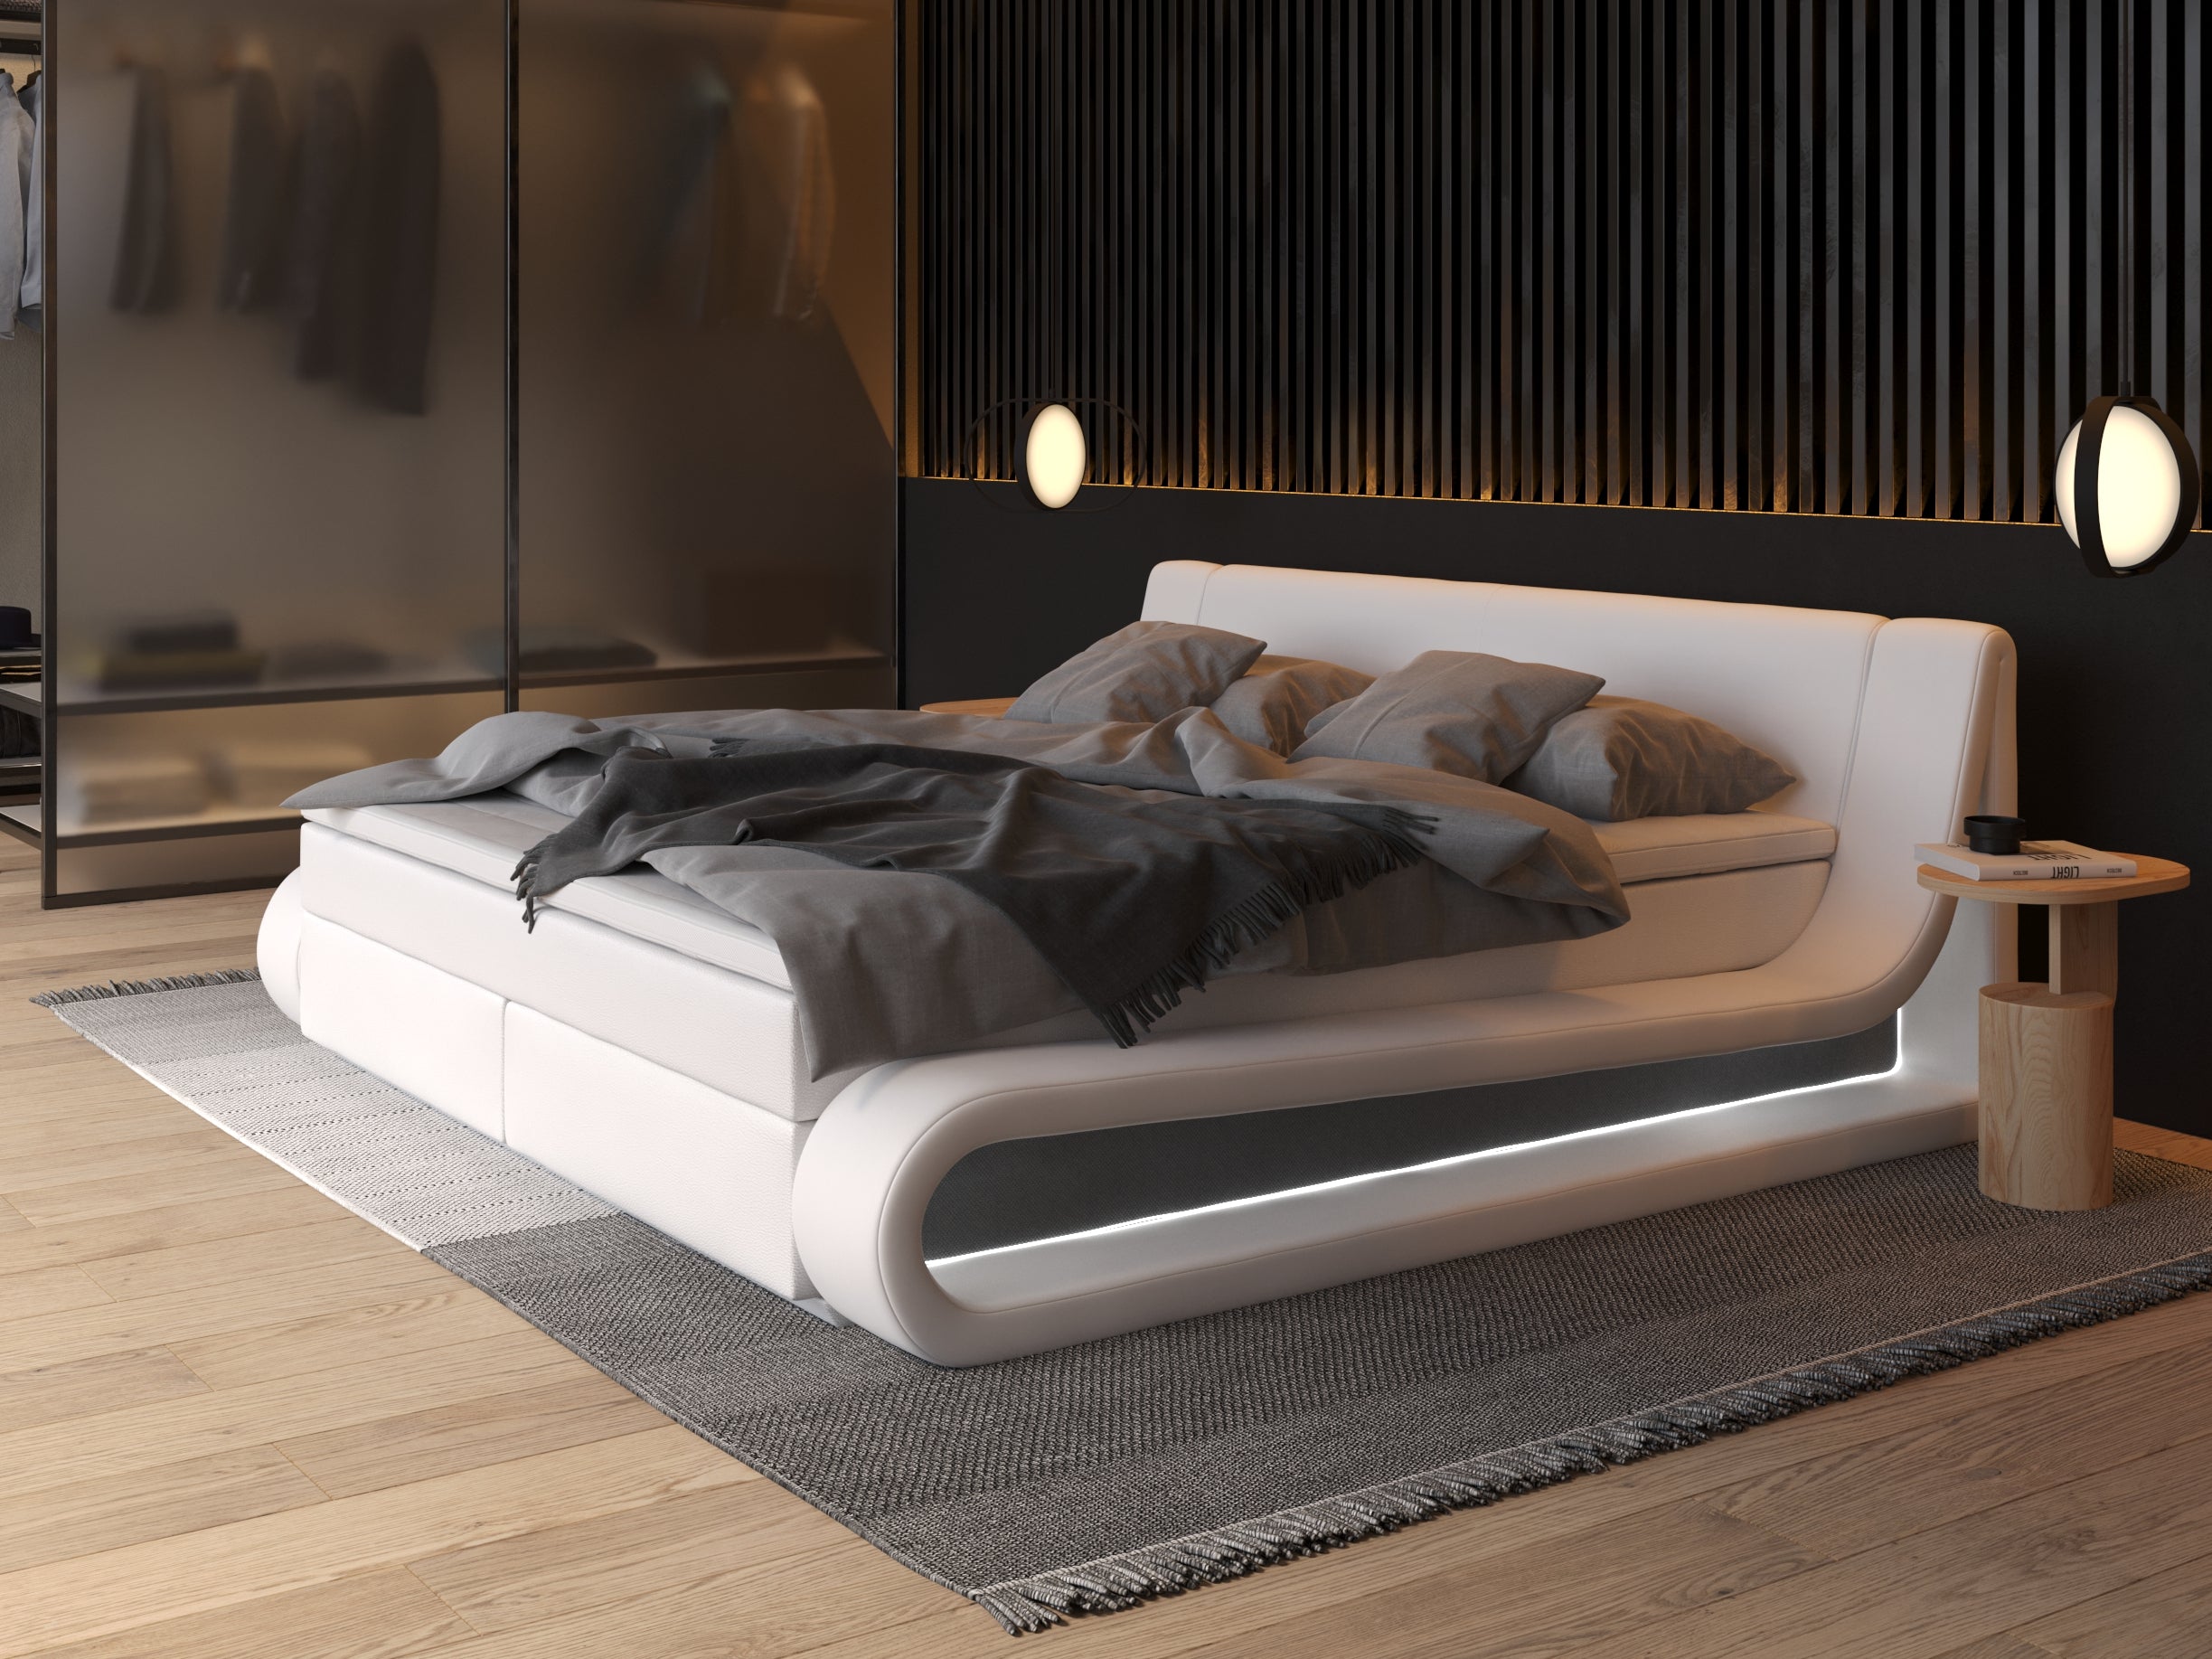 BOX-121-VILLARI: Revolutionary Boxspringbed for Unmatched Comfort and Style